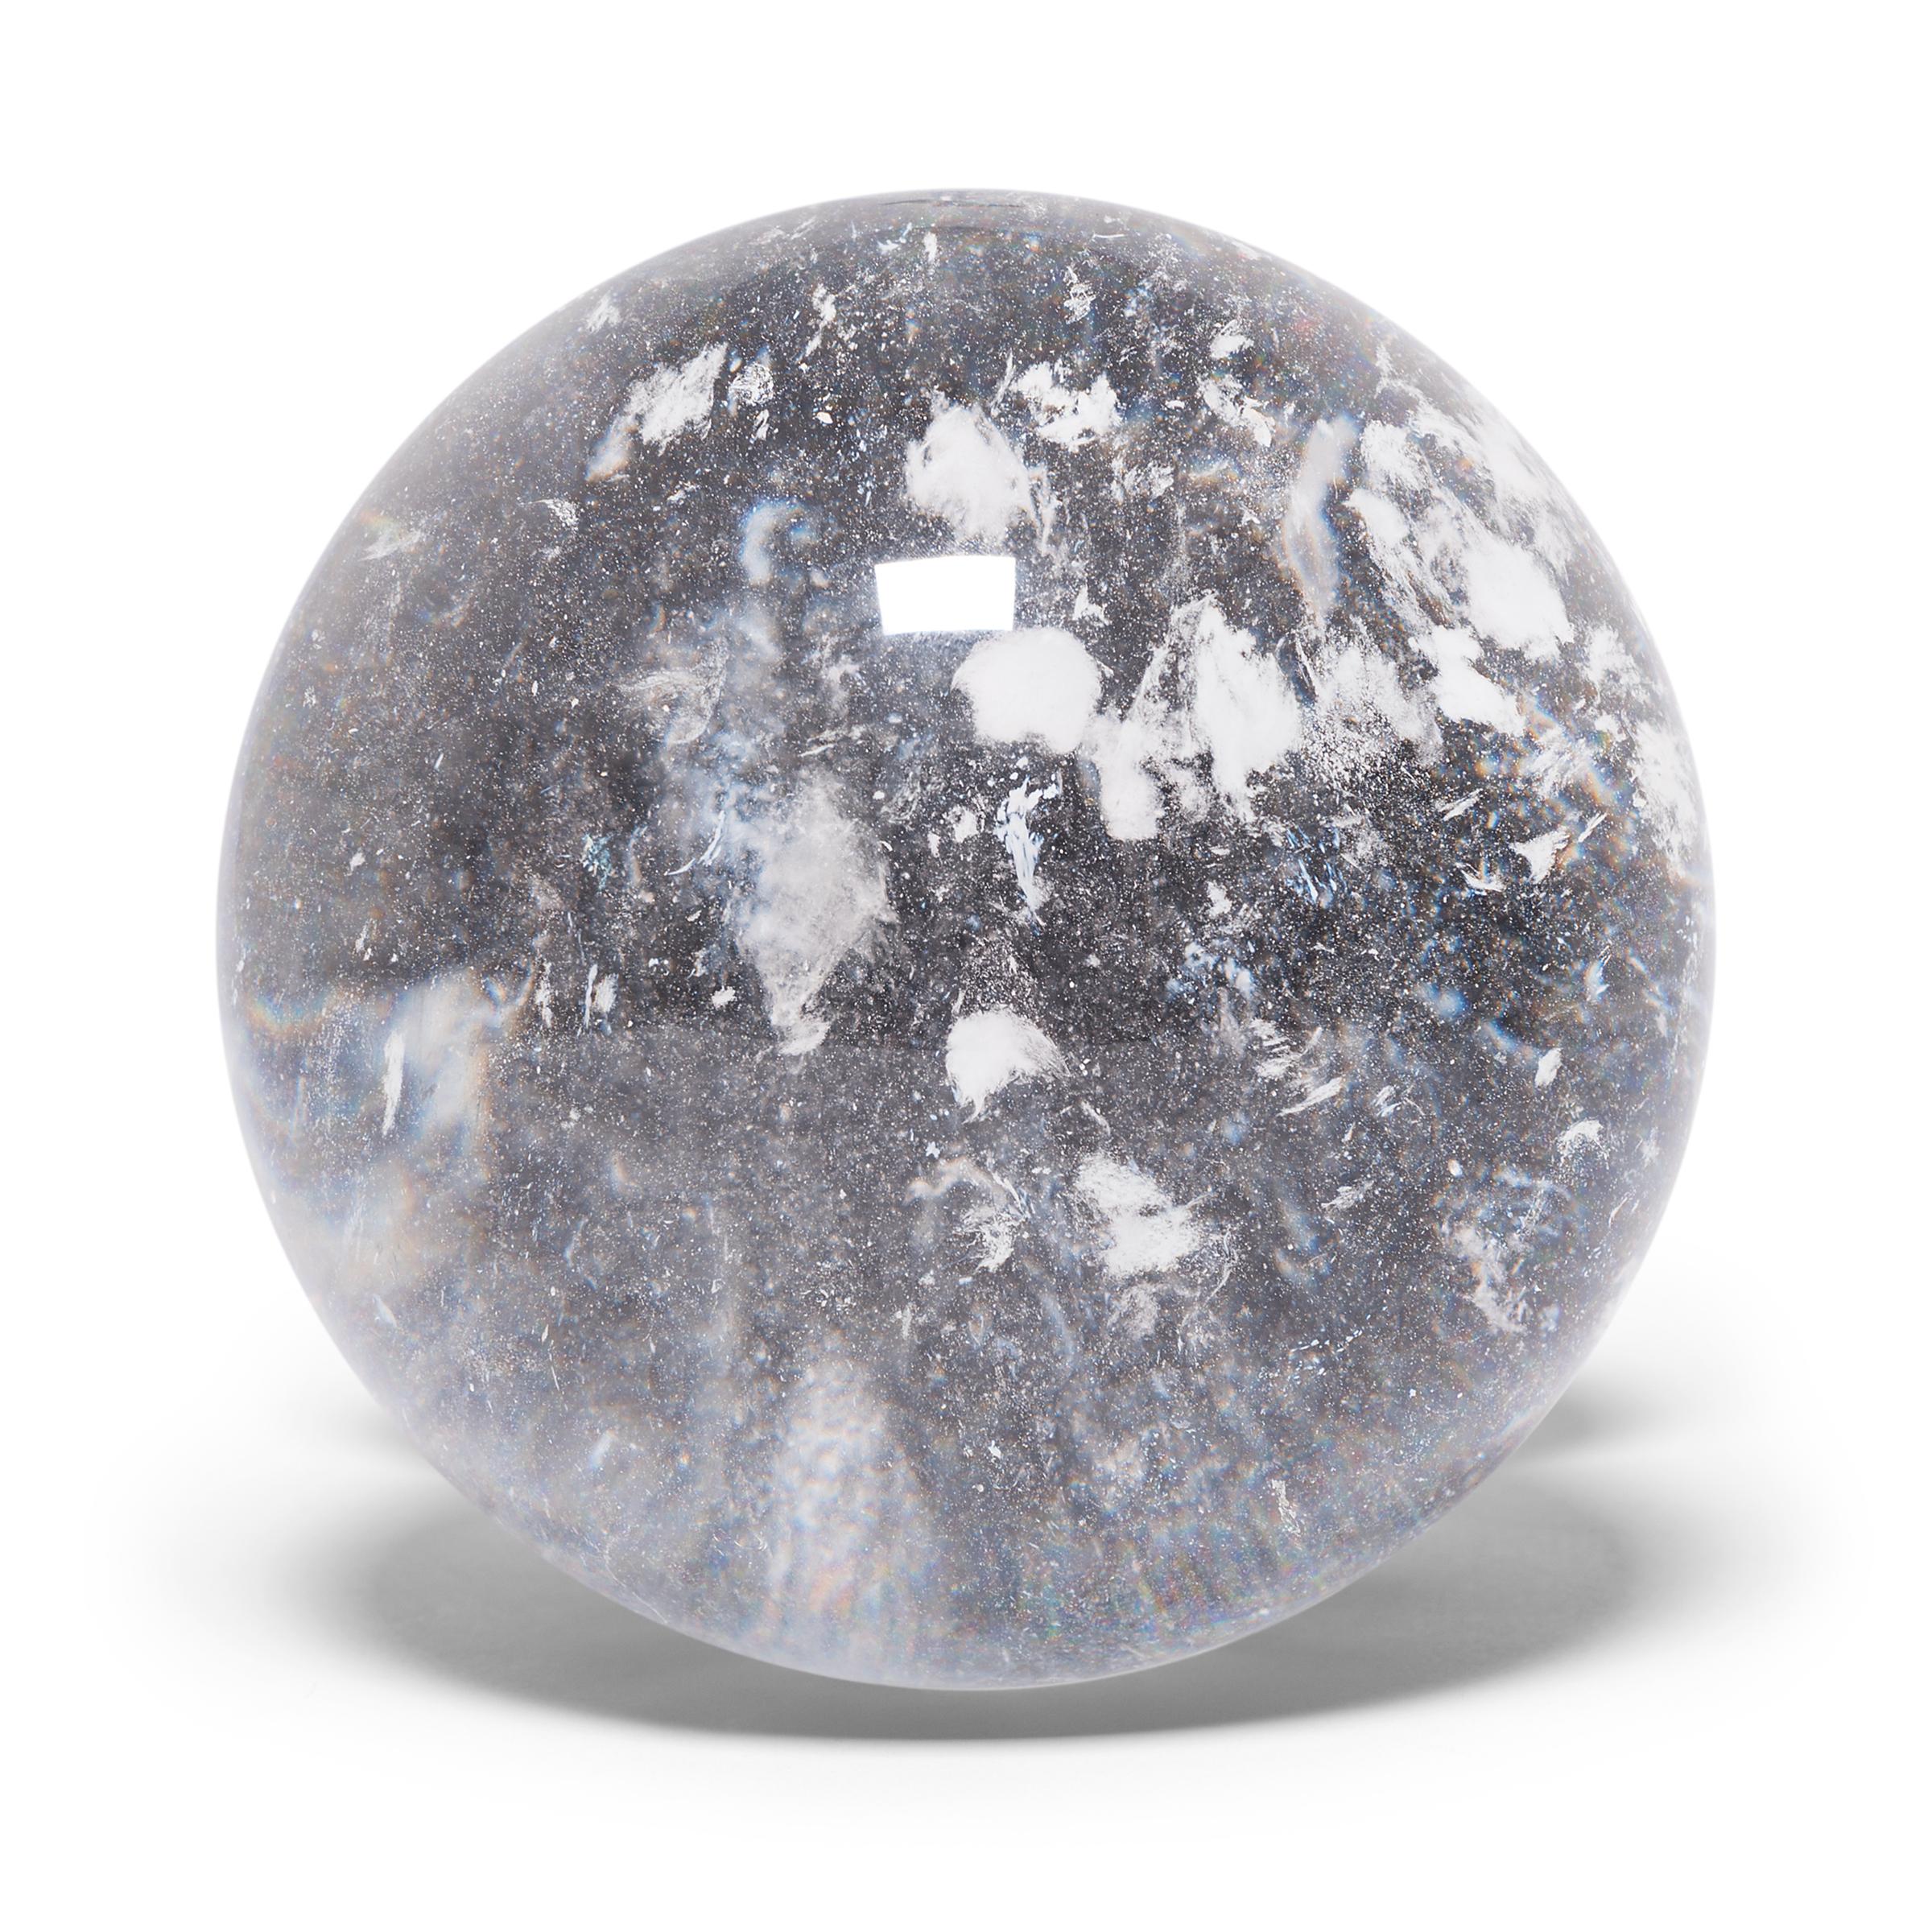 Gem lore is endless, and every culture has its own beliefs about specific stones tied to cultural history, geography, and spiritual practices. In China, some practitioners of feng shui value clear quartz, like this beautiful crystal ball, for its